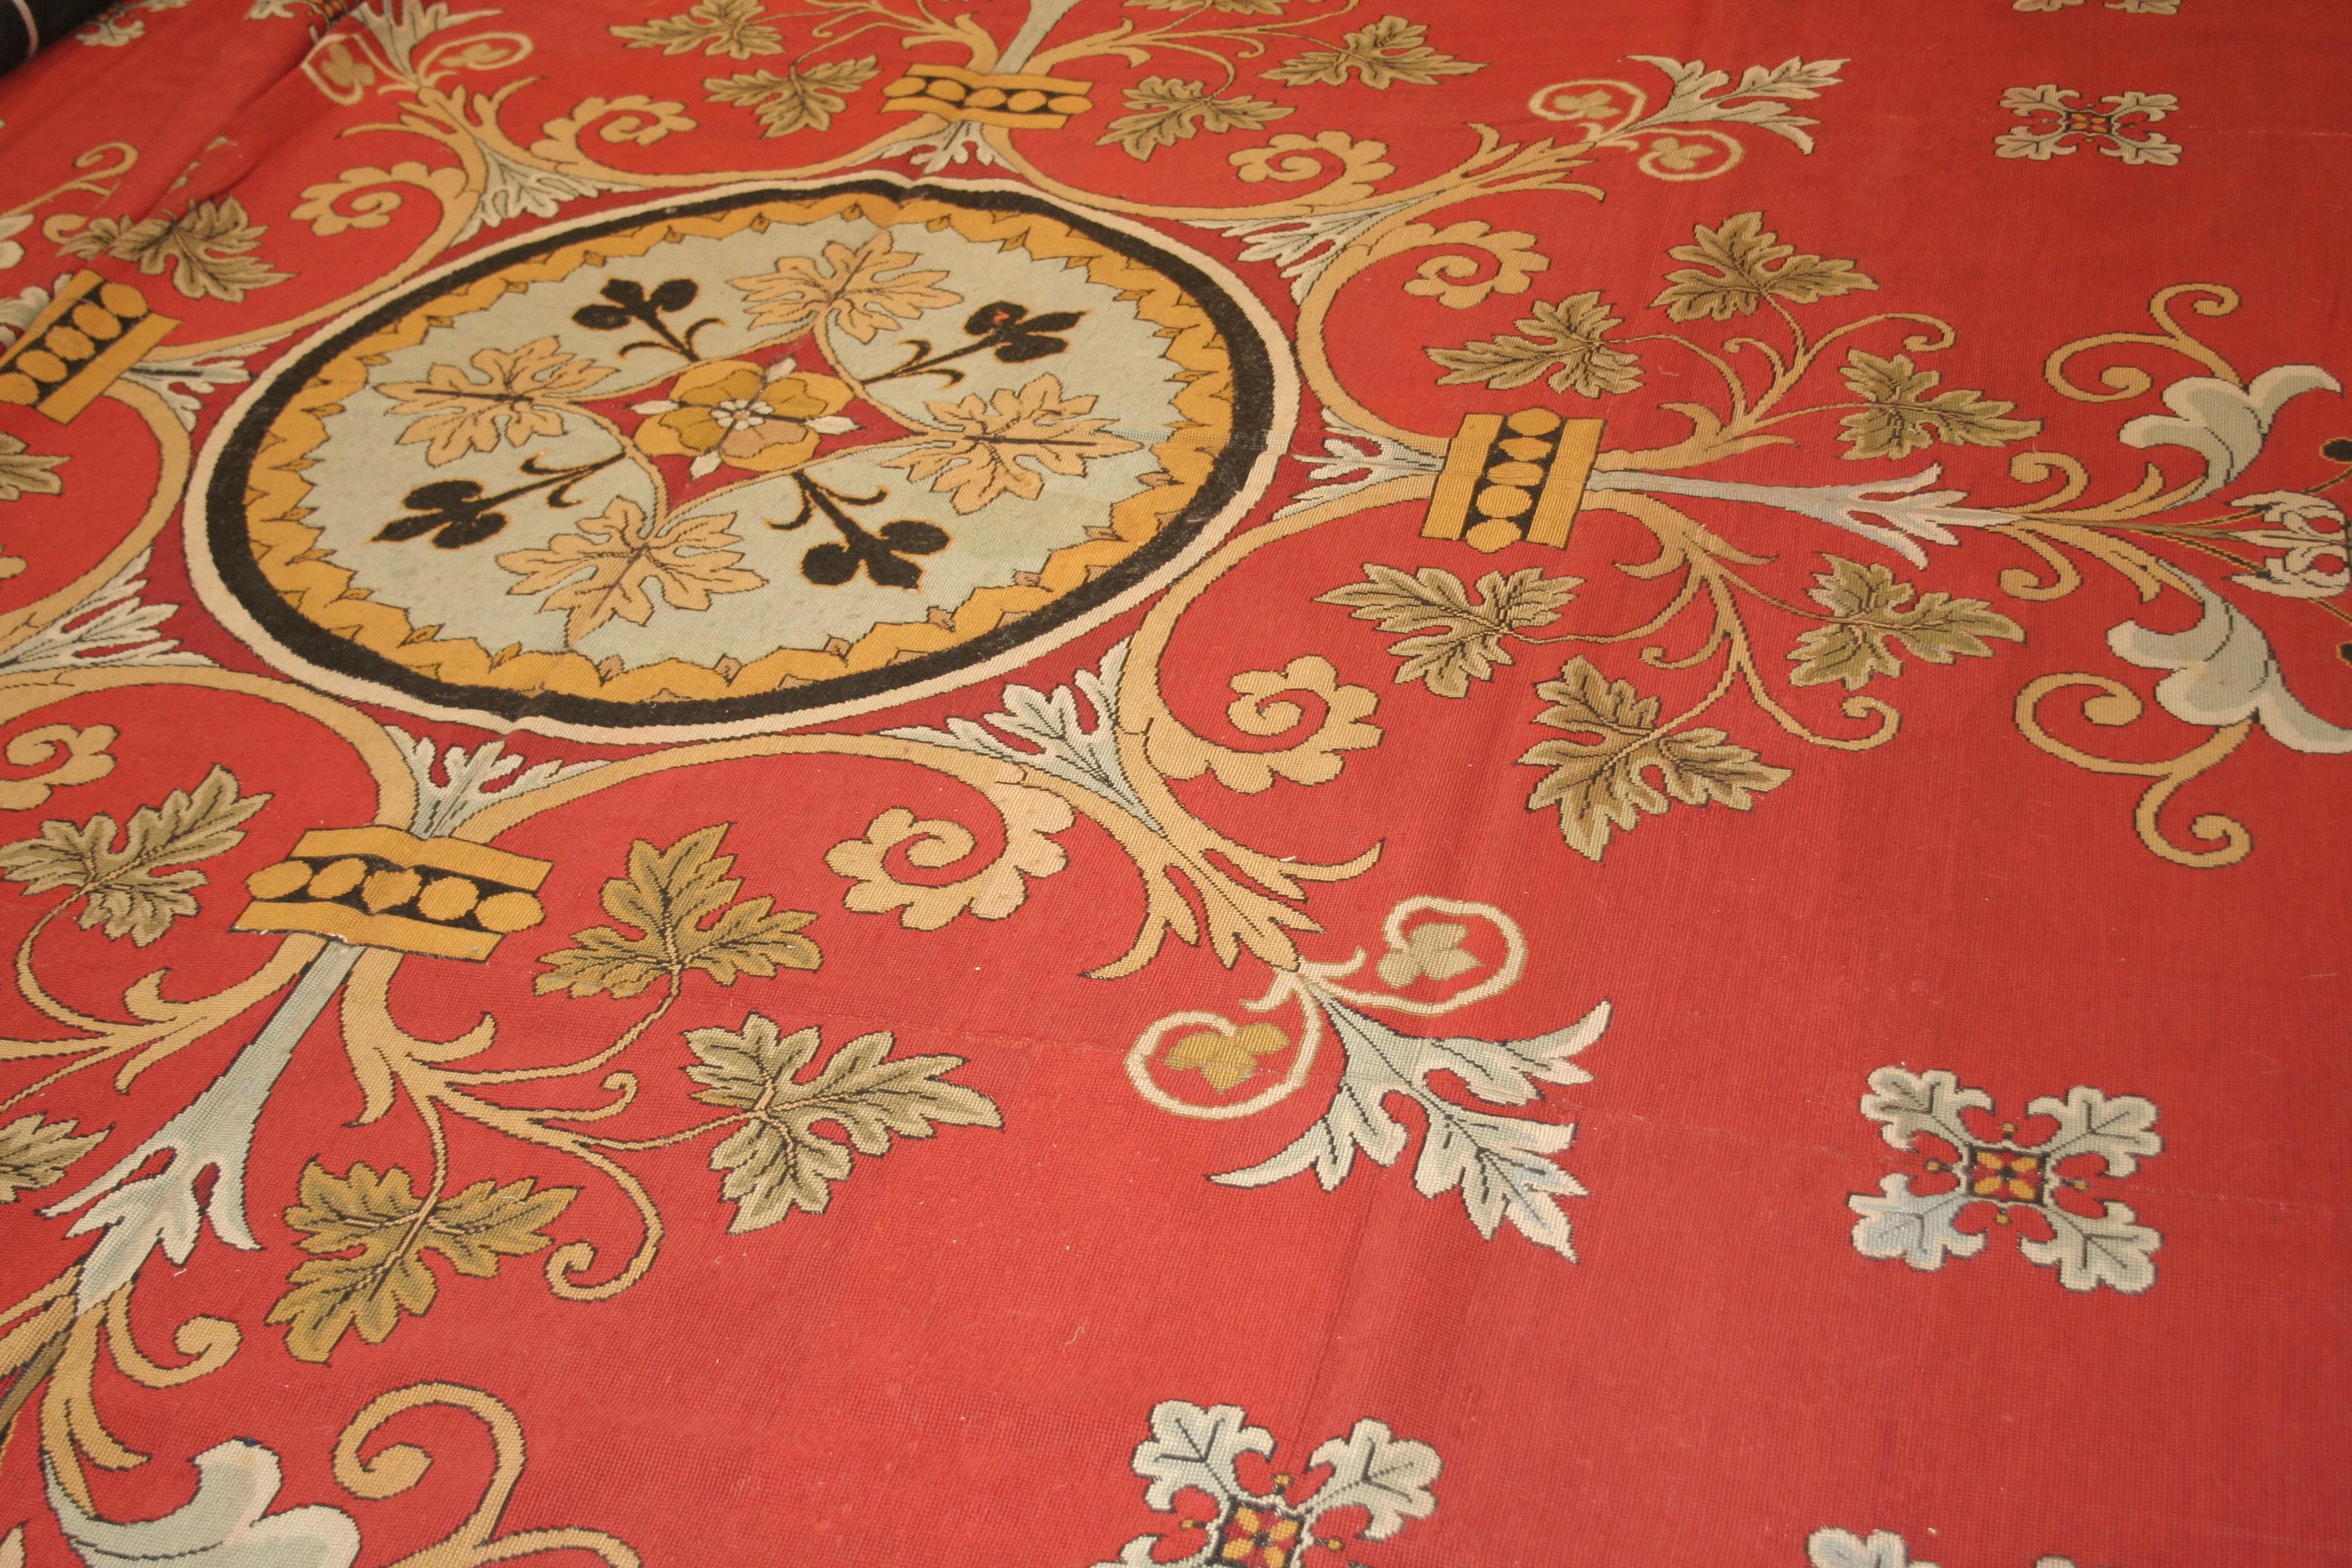 A stunning needlepoint carpet distinguished by a rich red field punctuated by a repeating floral motif and dominated by an impeccably executed central element, elegantly decorated with flowers and leafs placed on a roundel of neoclassical